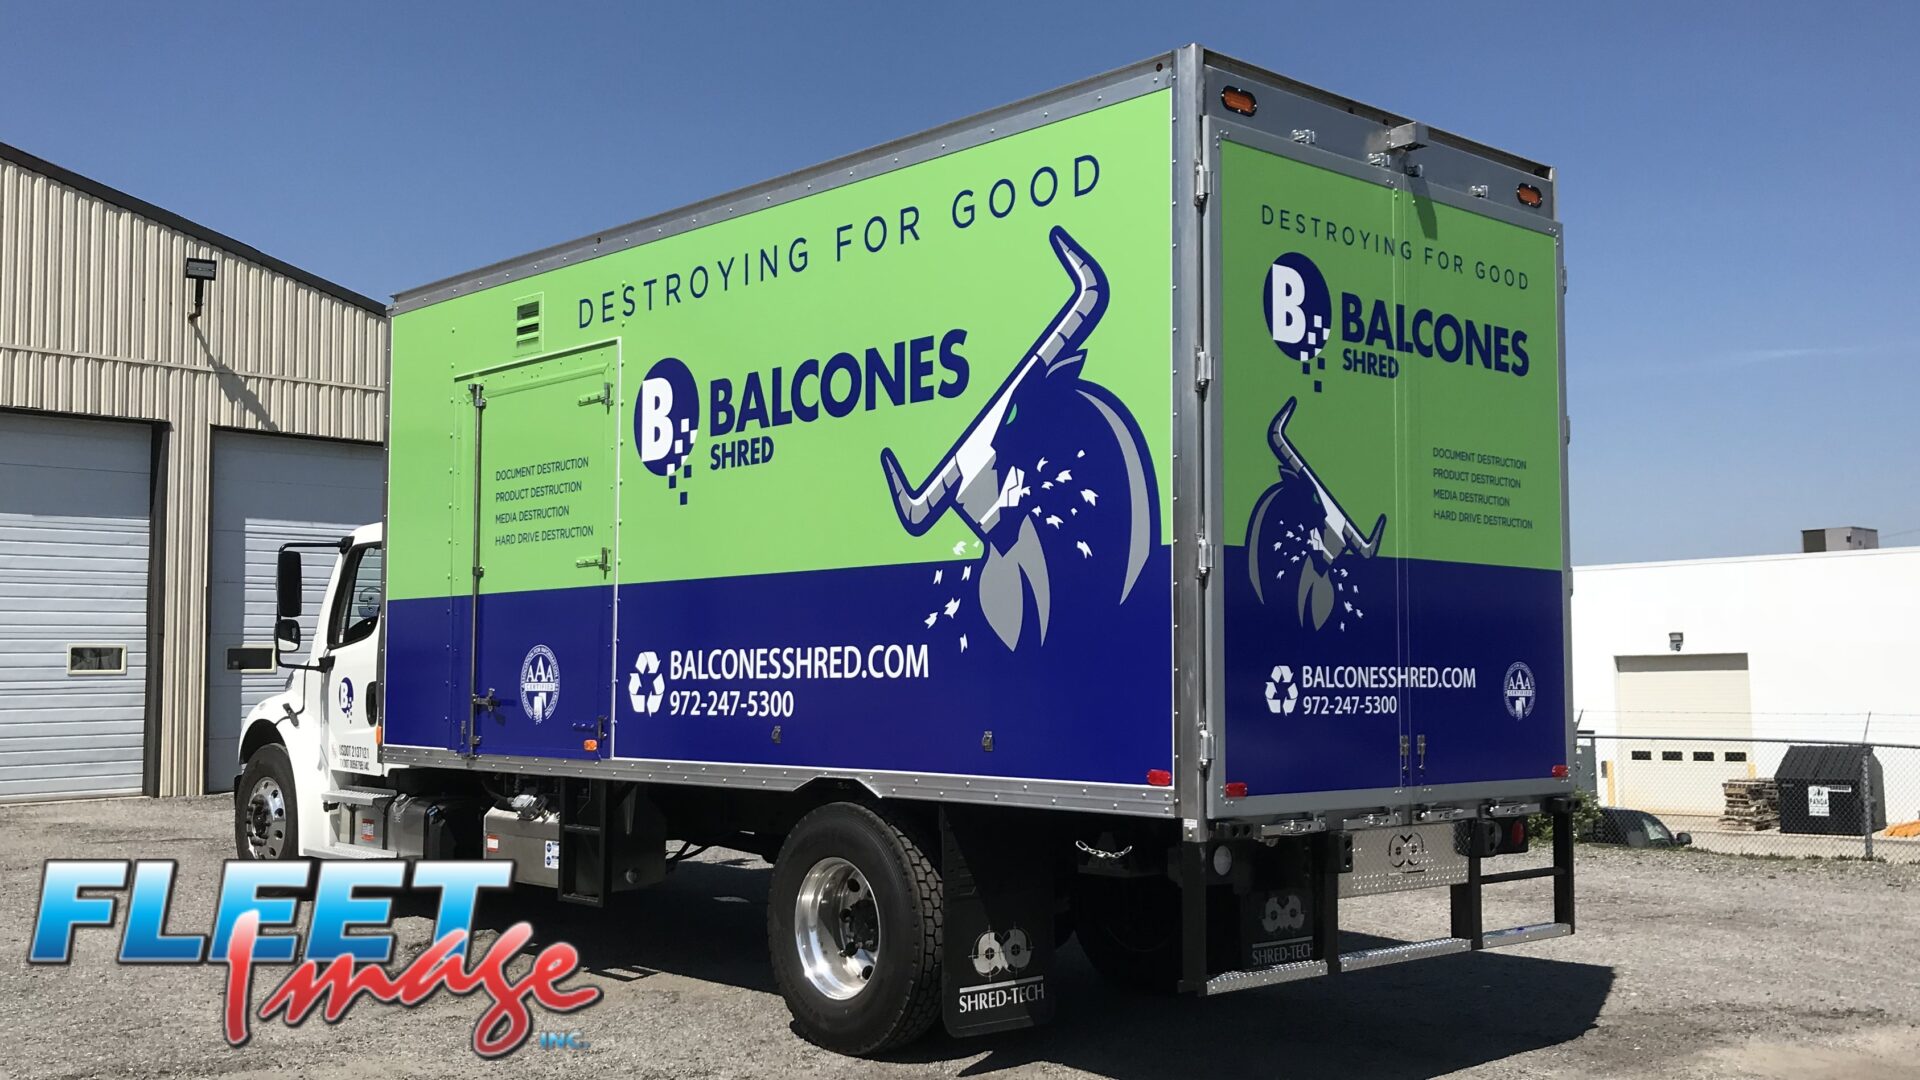 BALCONES SHRED decal sticker on a truck